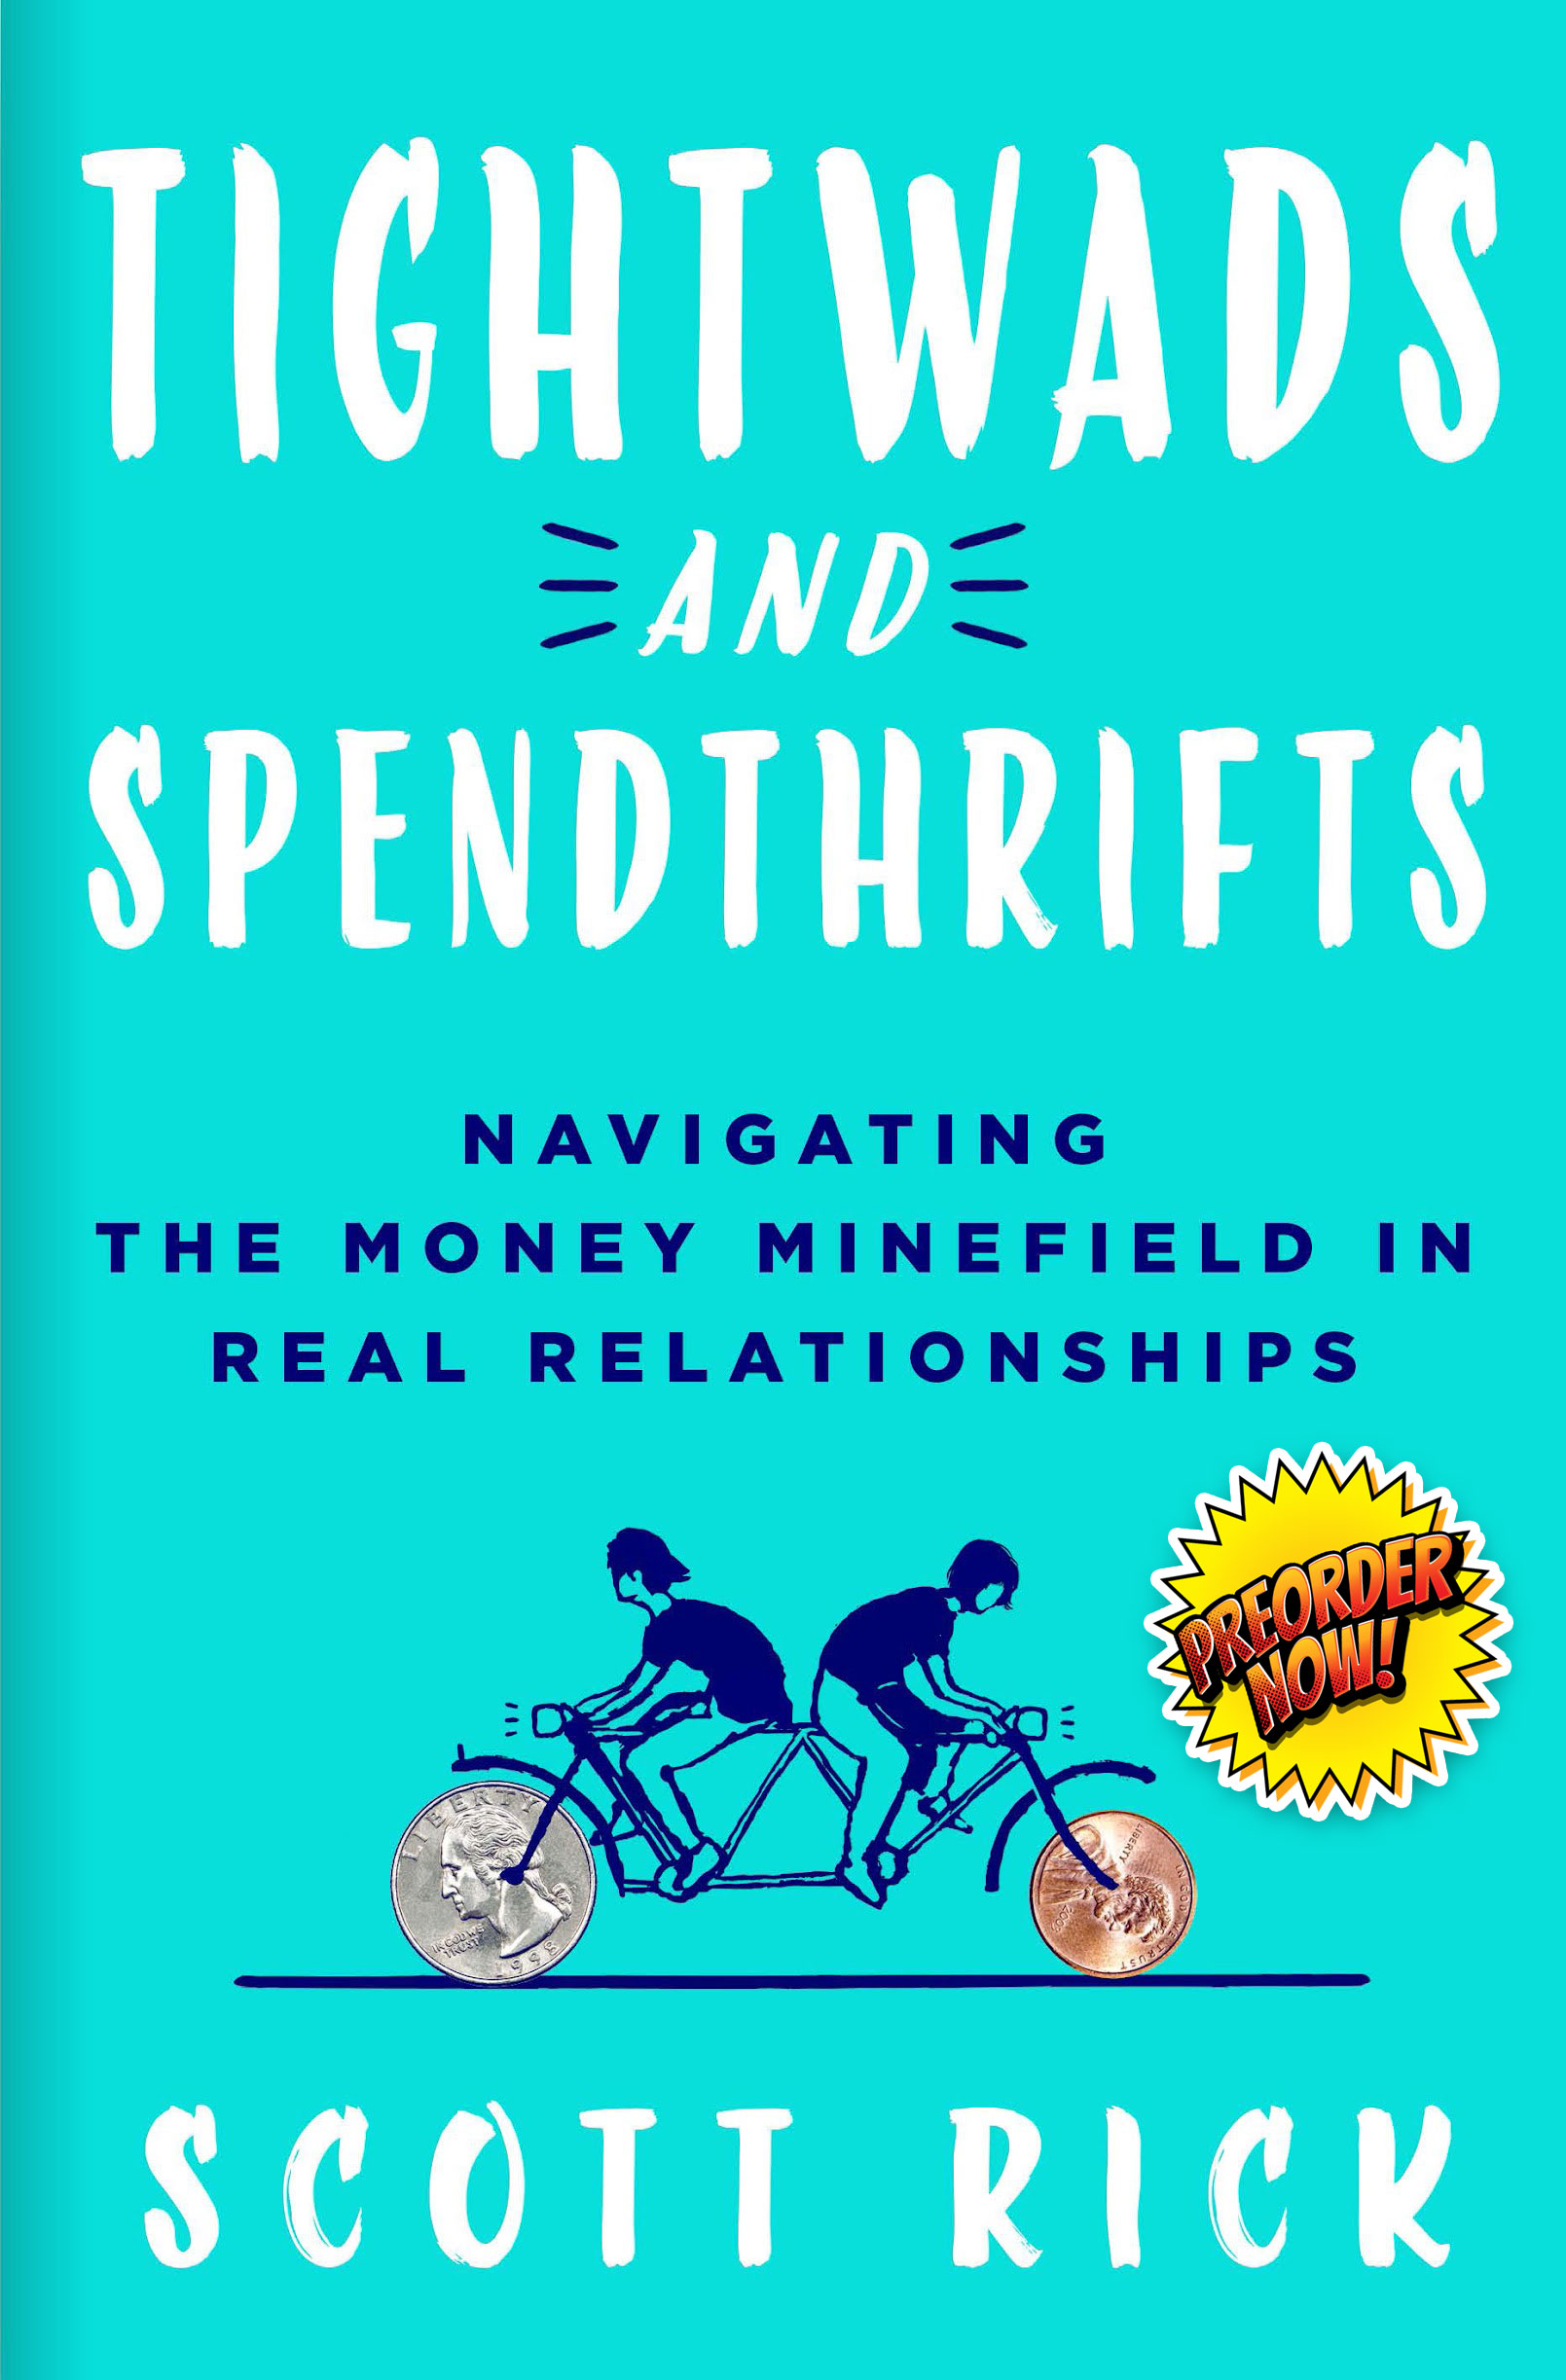 Tightwards and Spendthrifts: Navigating the money minefield in real relationships by Scott Rick, pre-order now